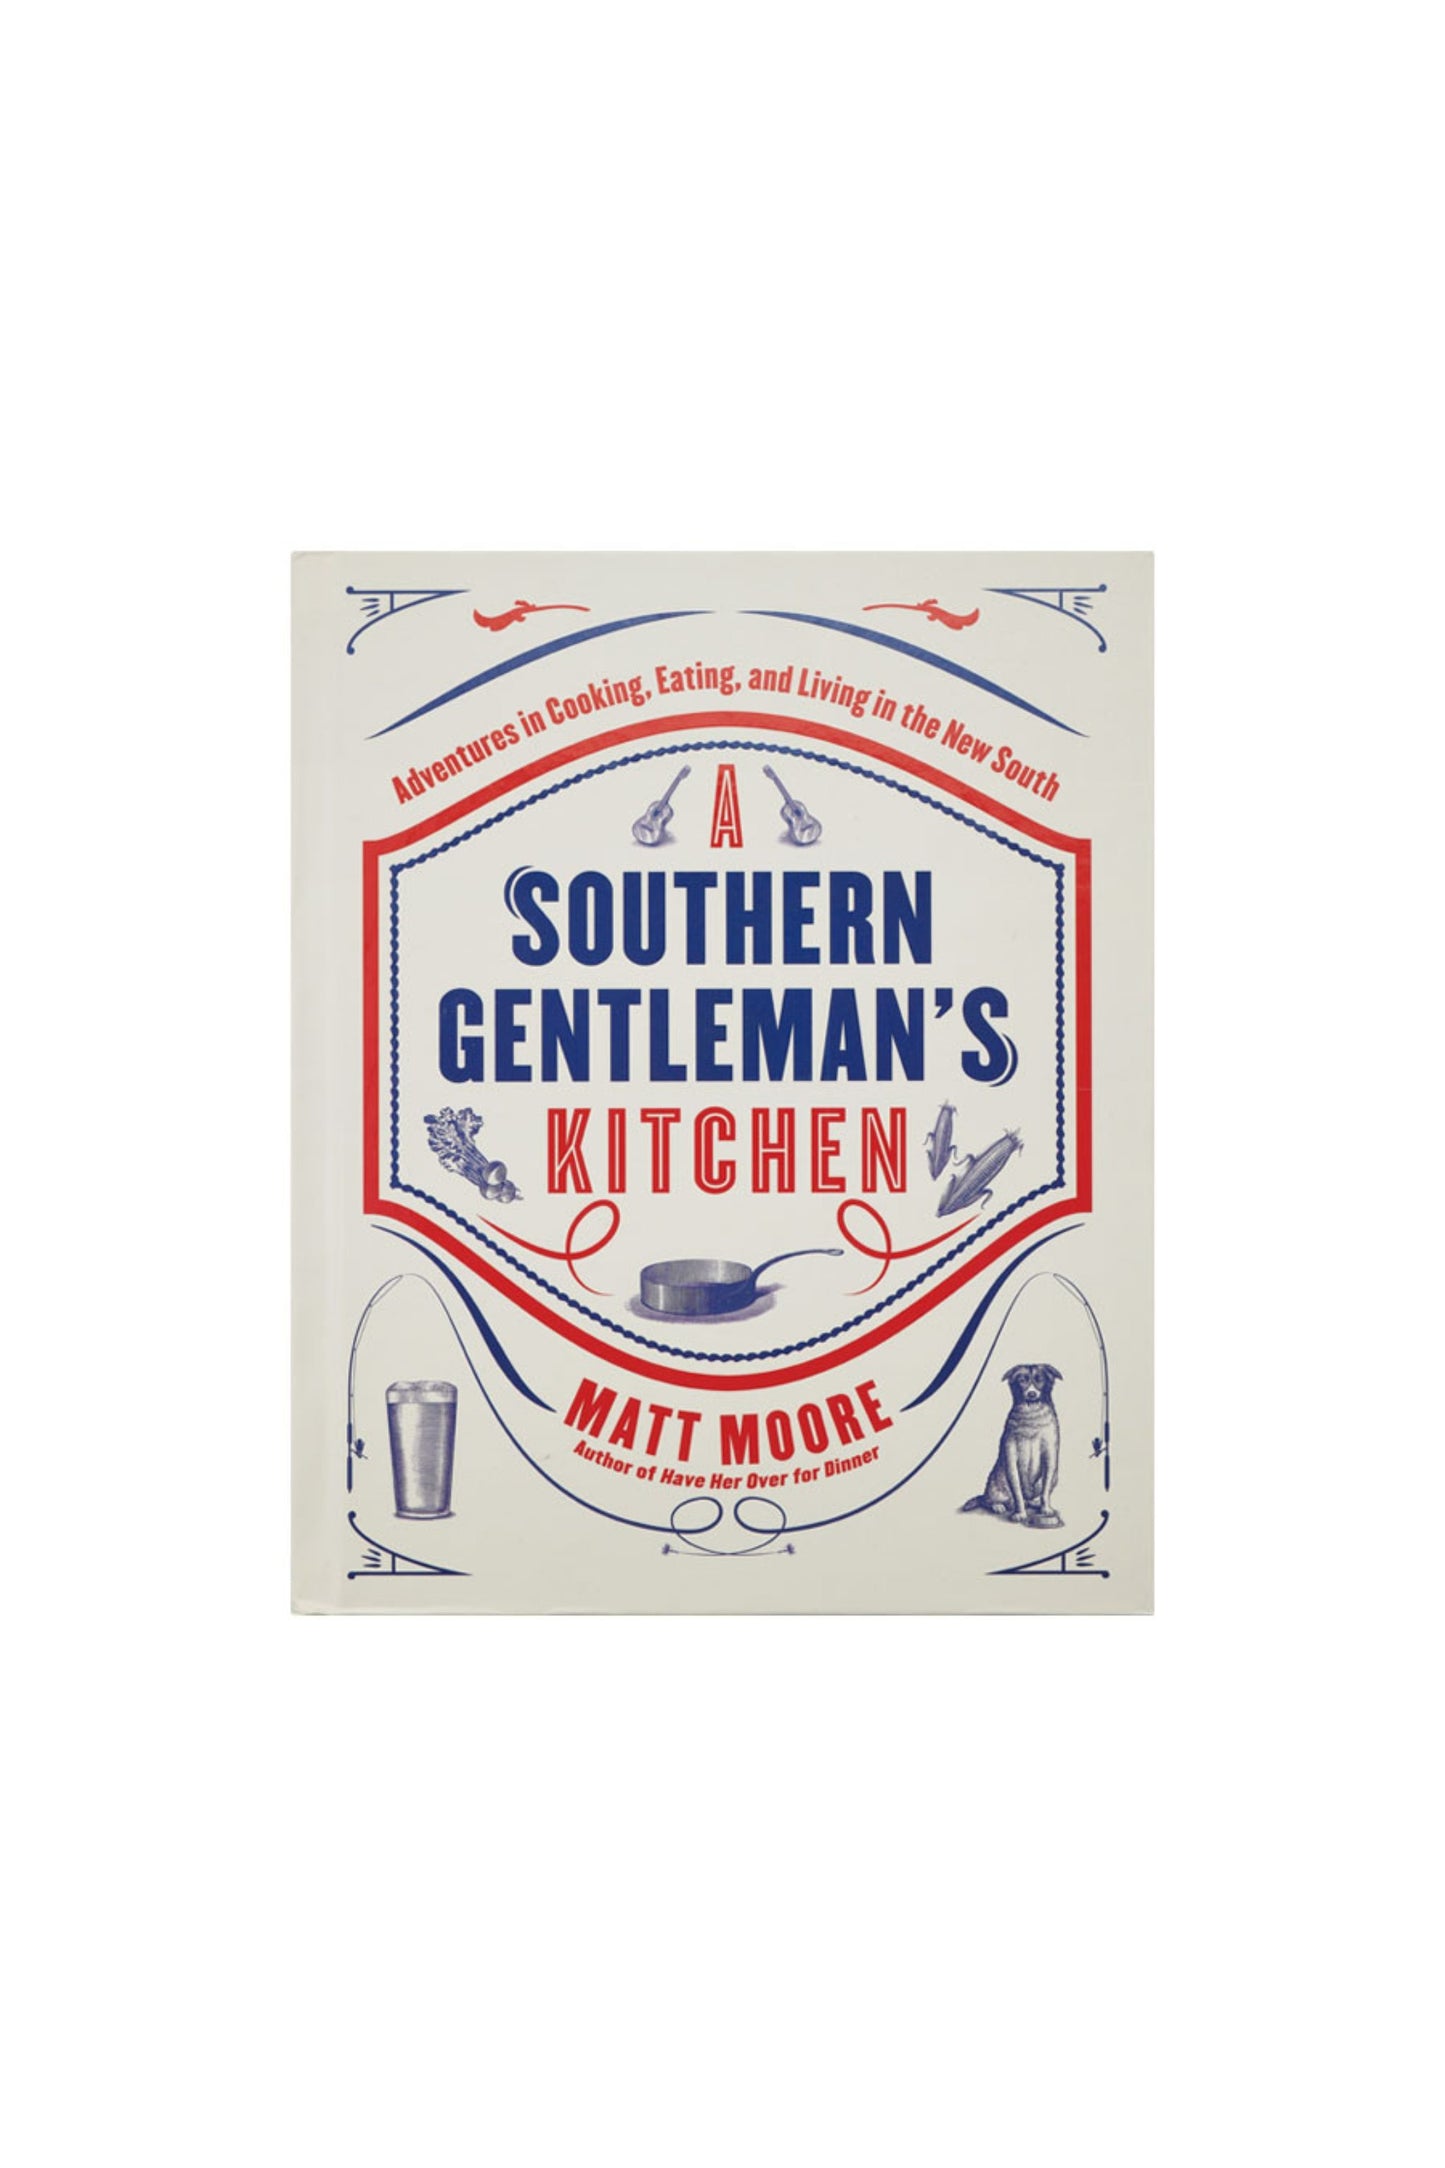 Adventures in cooking, eating and living in the  new south. Southern Gentleman's Kitchen Cookbook by Matt Moore. Writing in navy and red. 